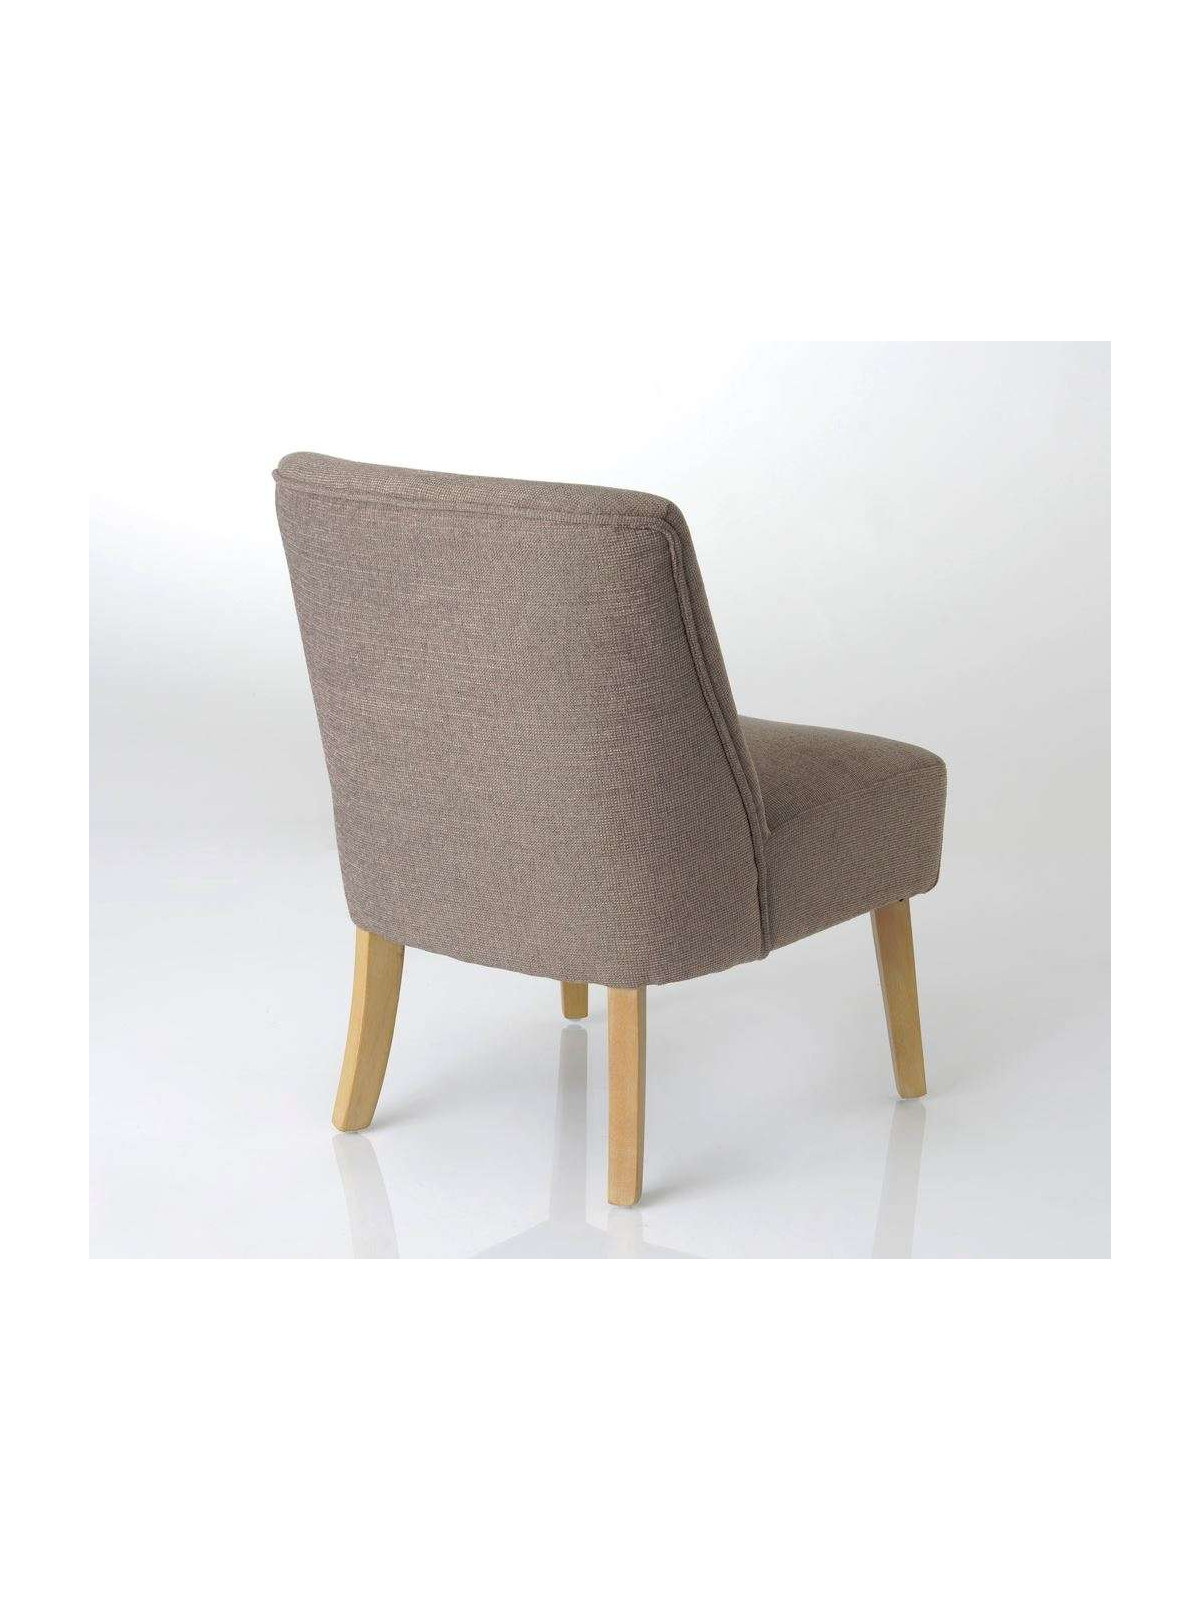 Fauteuil bas taupe chiné